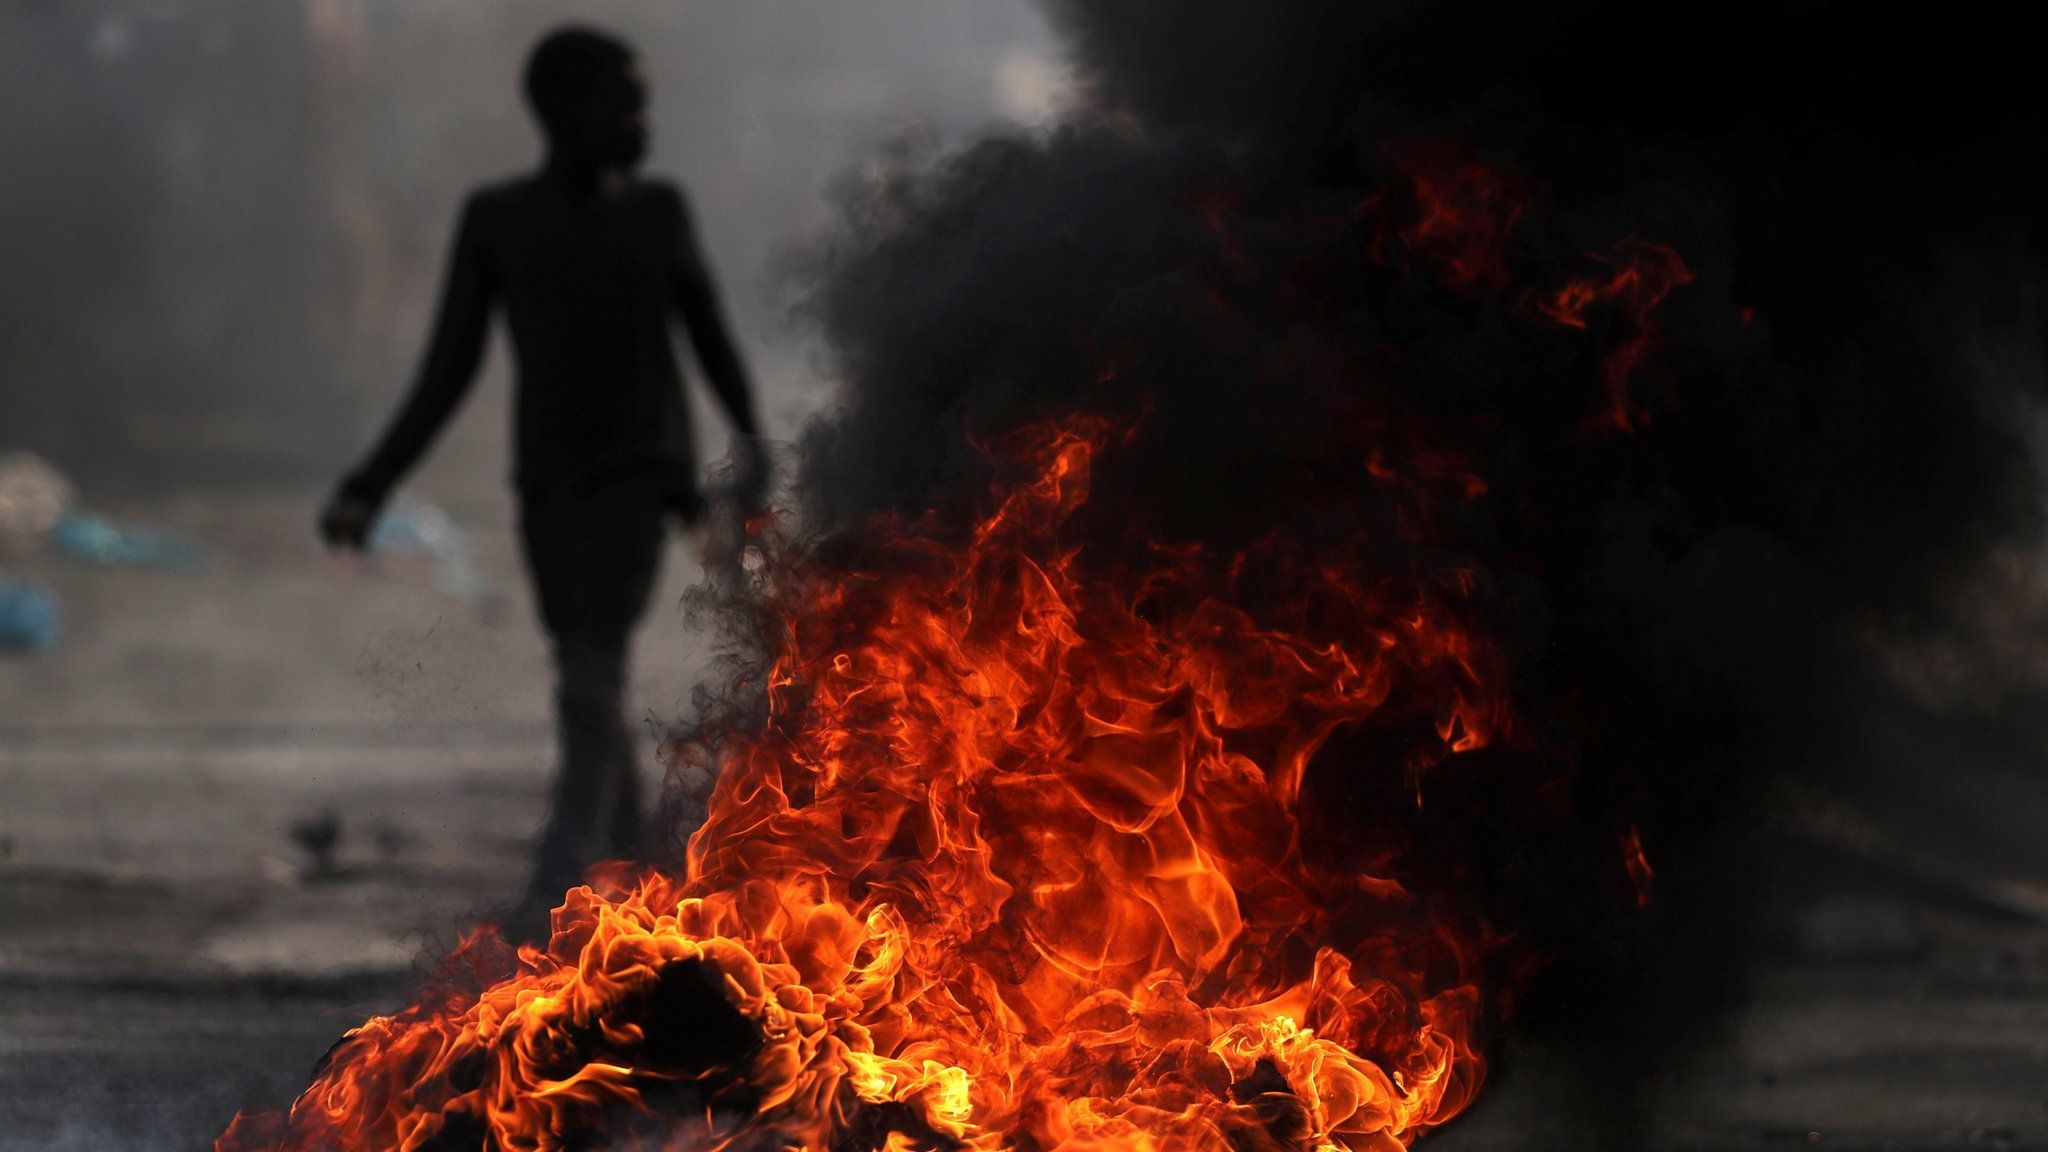 A child walks past a burning barricade during anti-government protests in Port-au-Prince